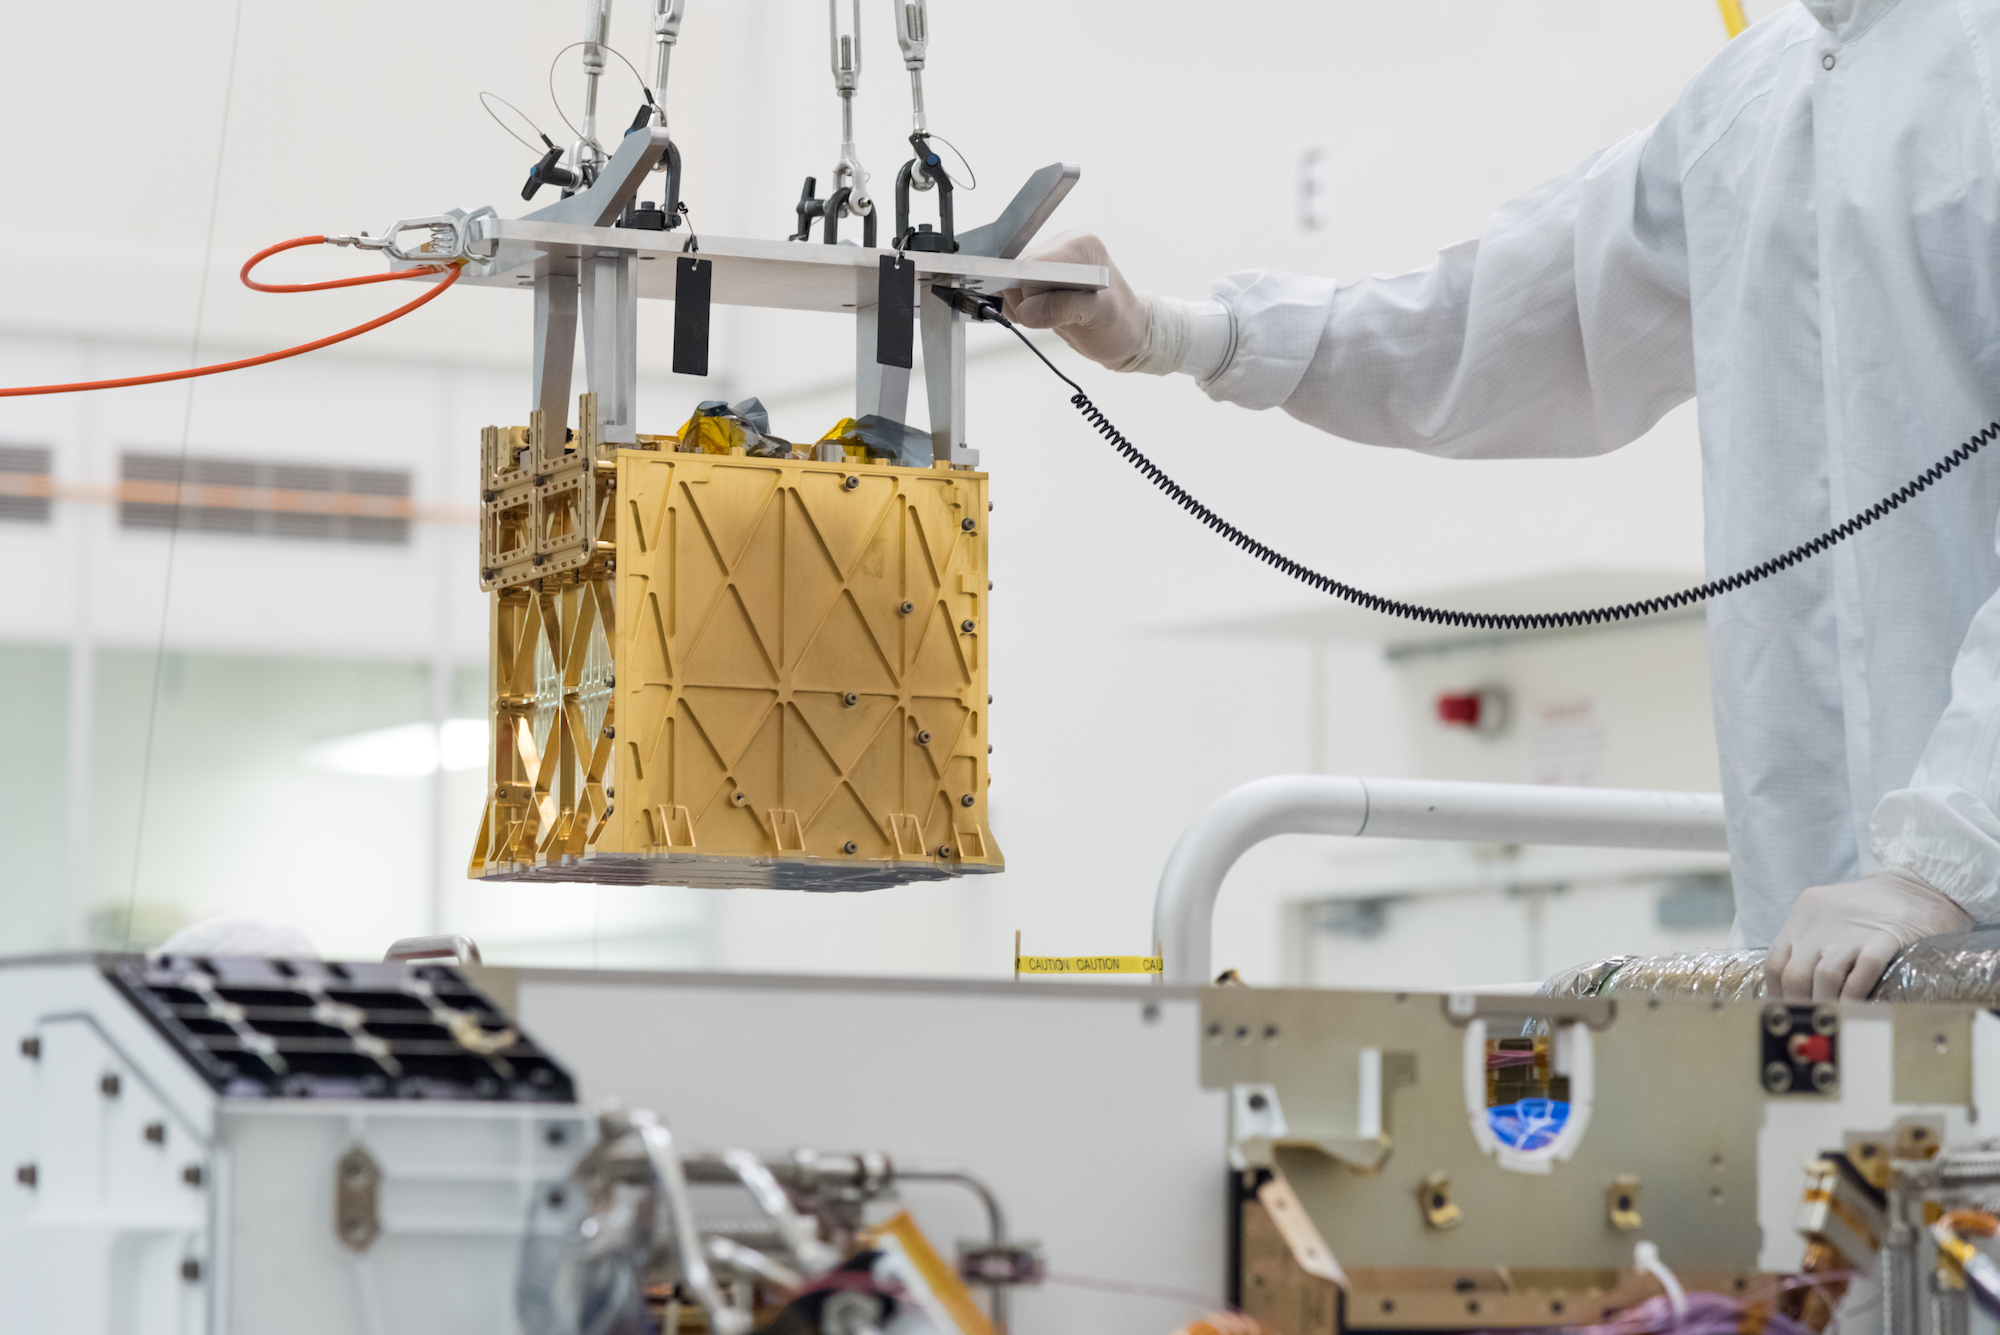 The MOXIE instrument is lowered into rover in the clean room.